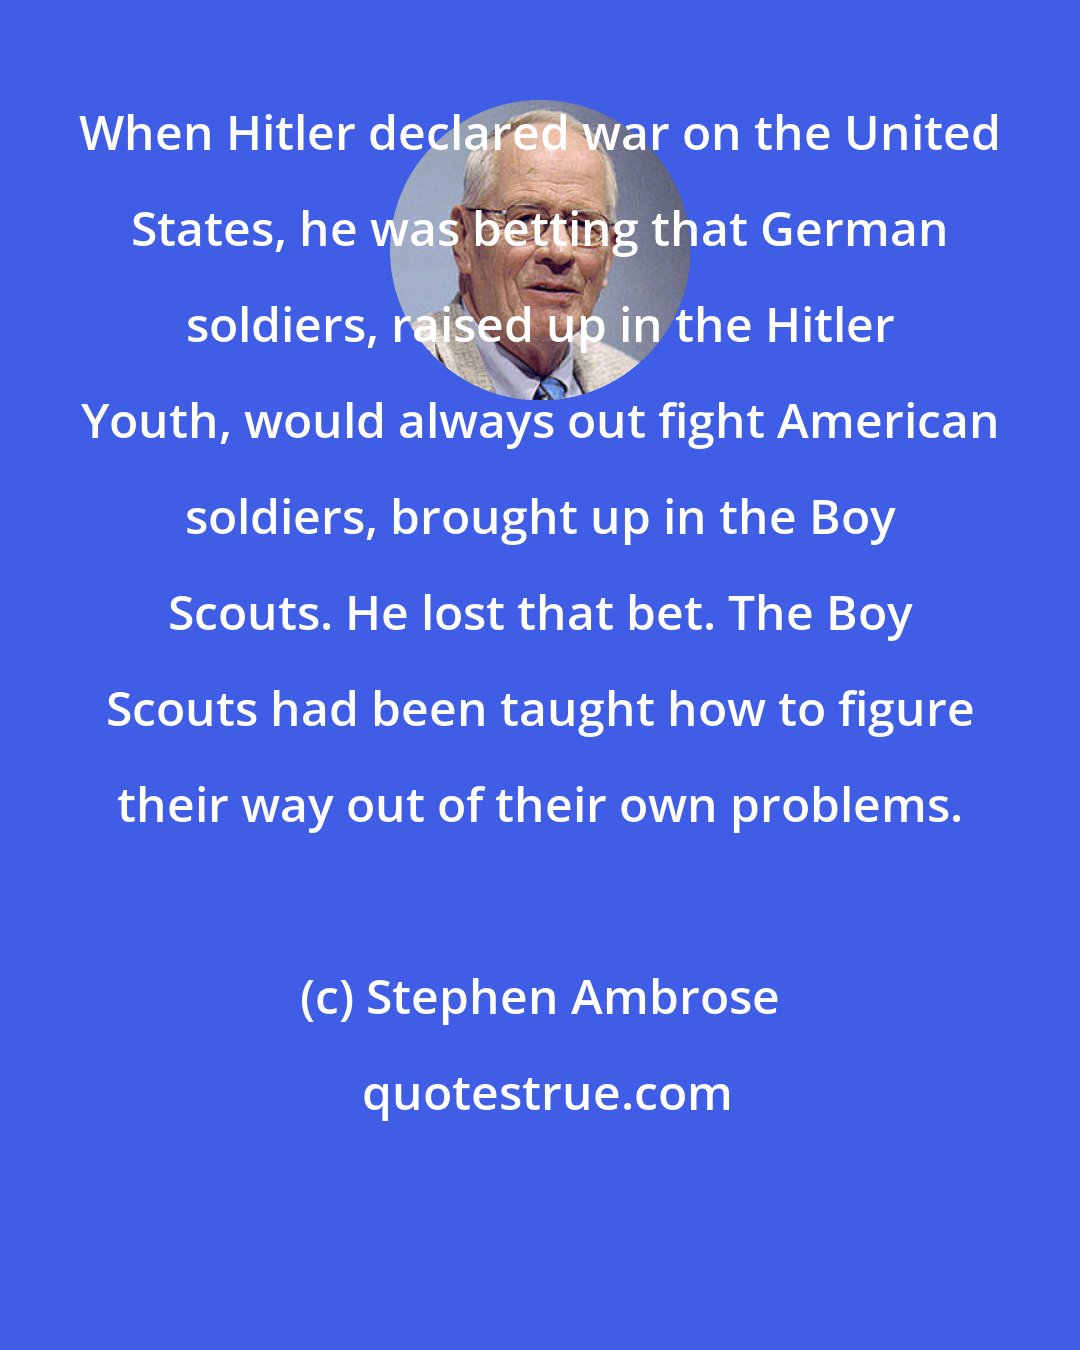 Stephen Ambrose: When Hitler declared war on the United States, he was betting that German soldiers, raised up in the Hitler Youth, would always out fight American soldiers, brought up in the Boy Scouts. He lost that bet. The Boy Scouts had been taught how to figure their way out of their own problems.